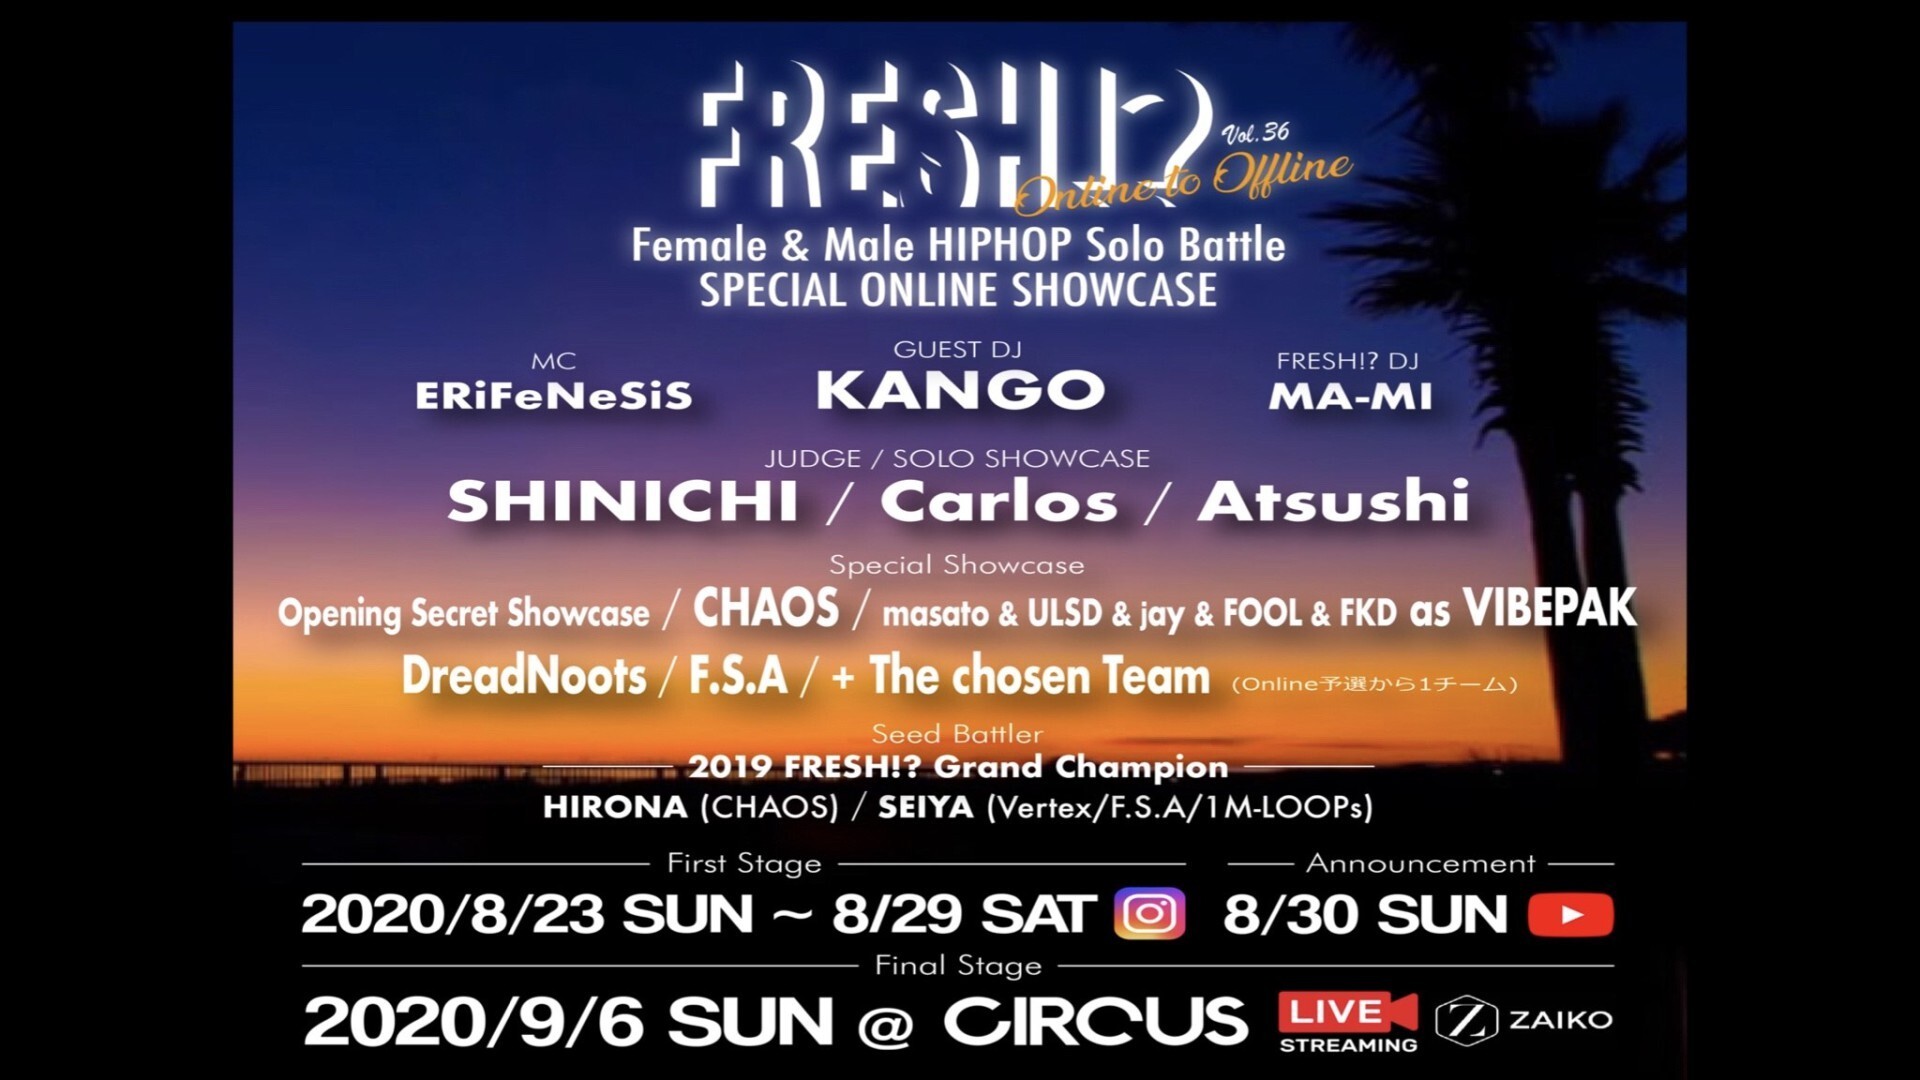 Iflyer Fresh Vol 36 Female Male Hiphop Solo Battle Special Online Showcase Zaiko Live Streaming